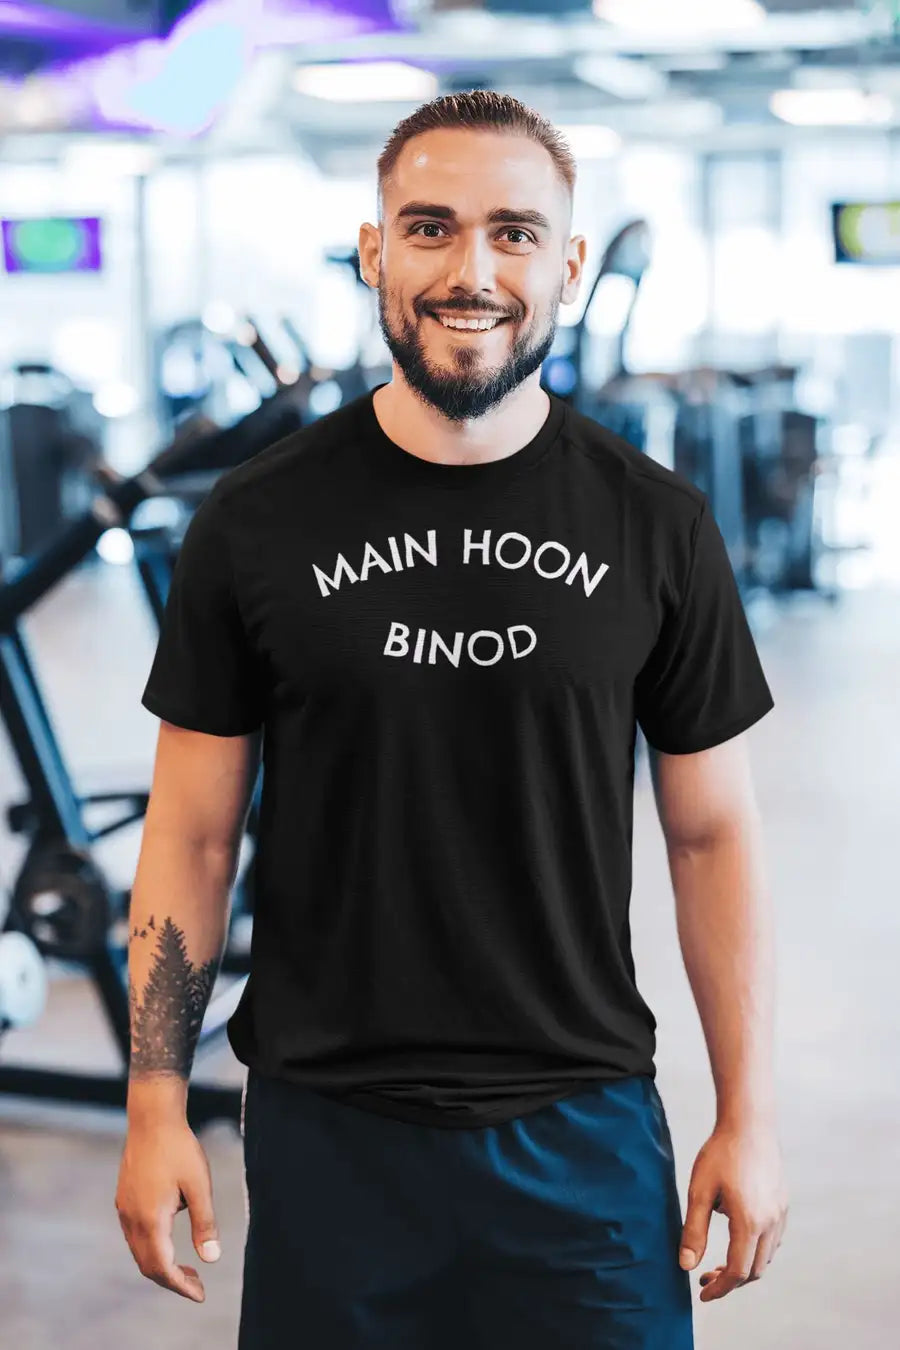 Main Hoon Binod Exclusive T Shirt for Men | Premium Design | Catch My Drift India - Catch My Drift India Clothing black, bollywood, clothing, funny, made in india, multi colour, shirt, t shir